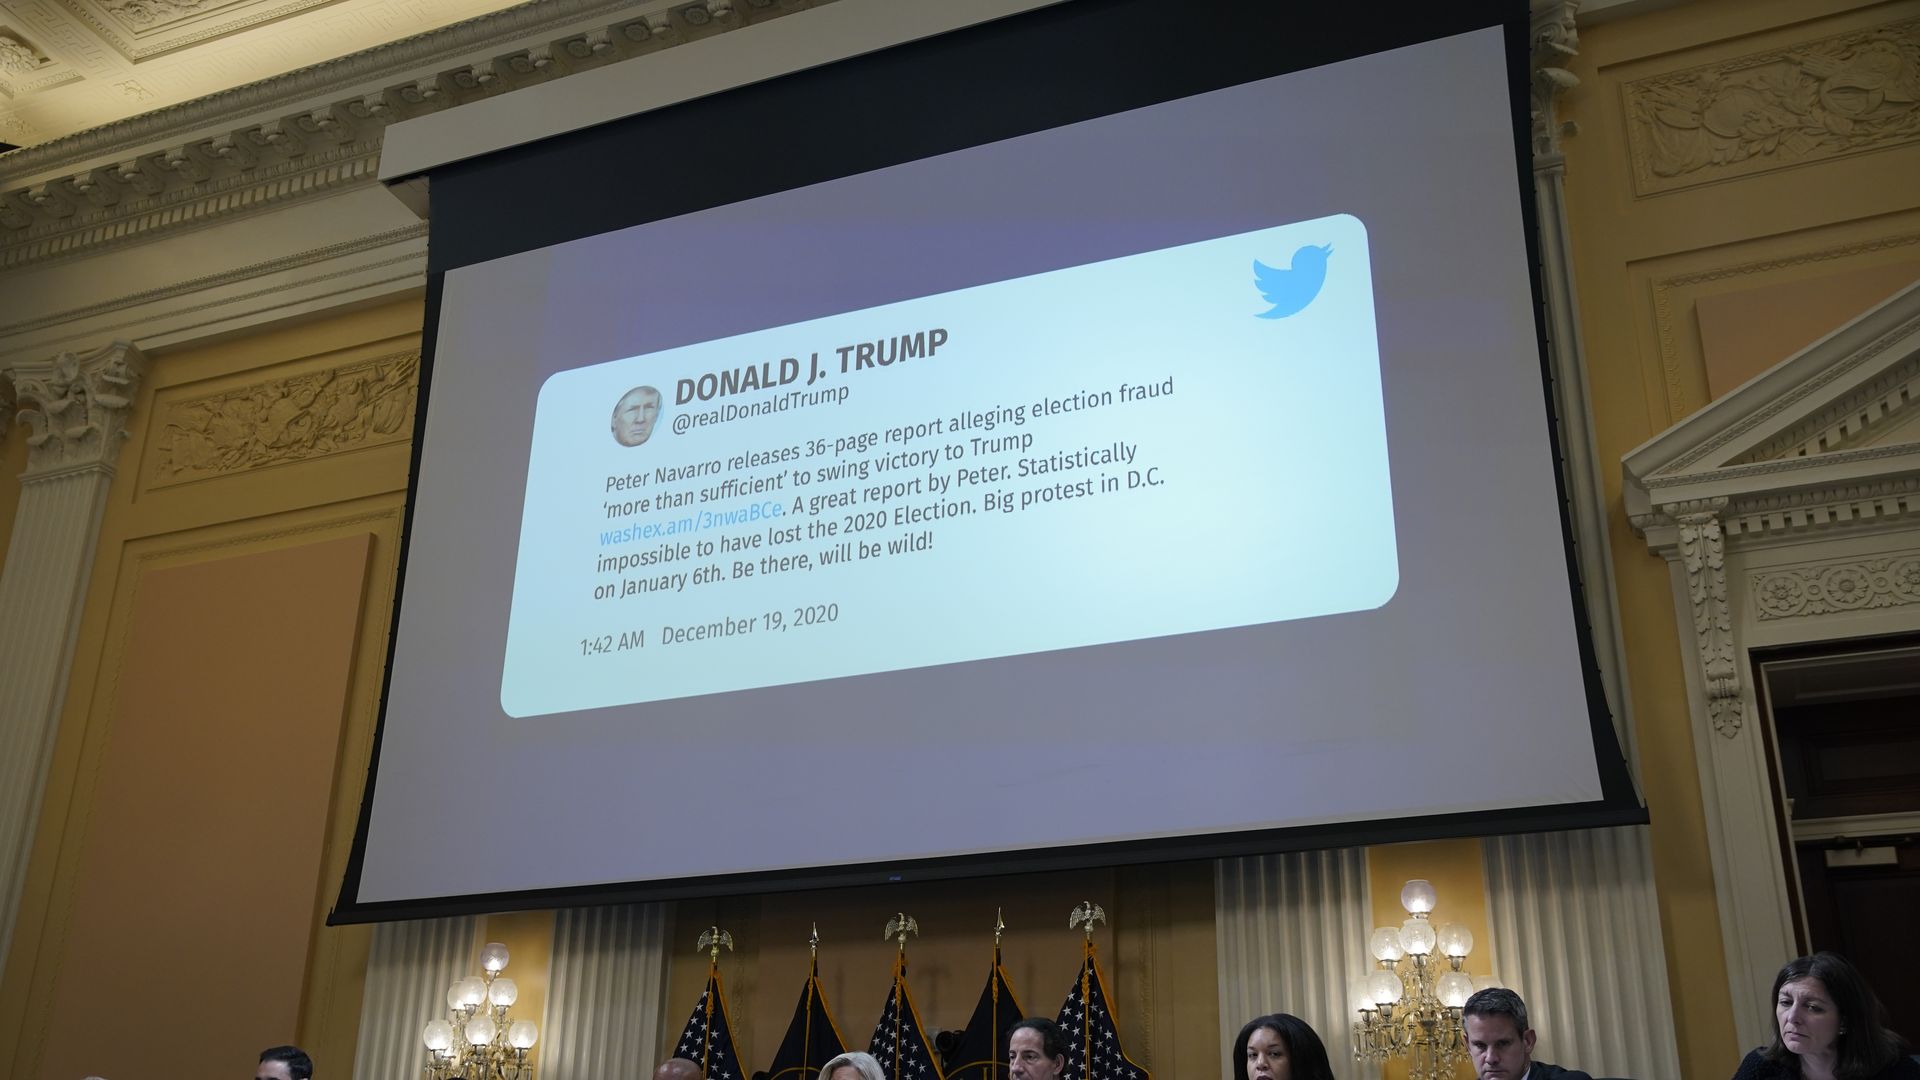 A tweet by former President Donald Trump displayed on a screen during a hearing of the Select Committee to Investigate the January 6th Attack on the US Capitol.